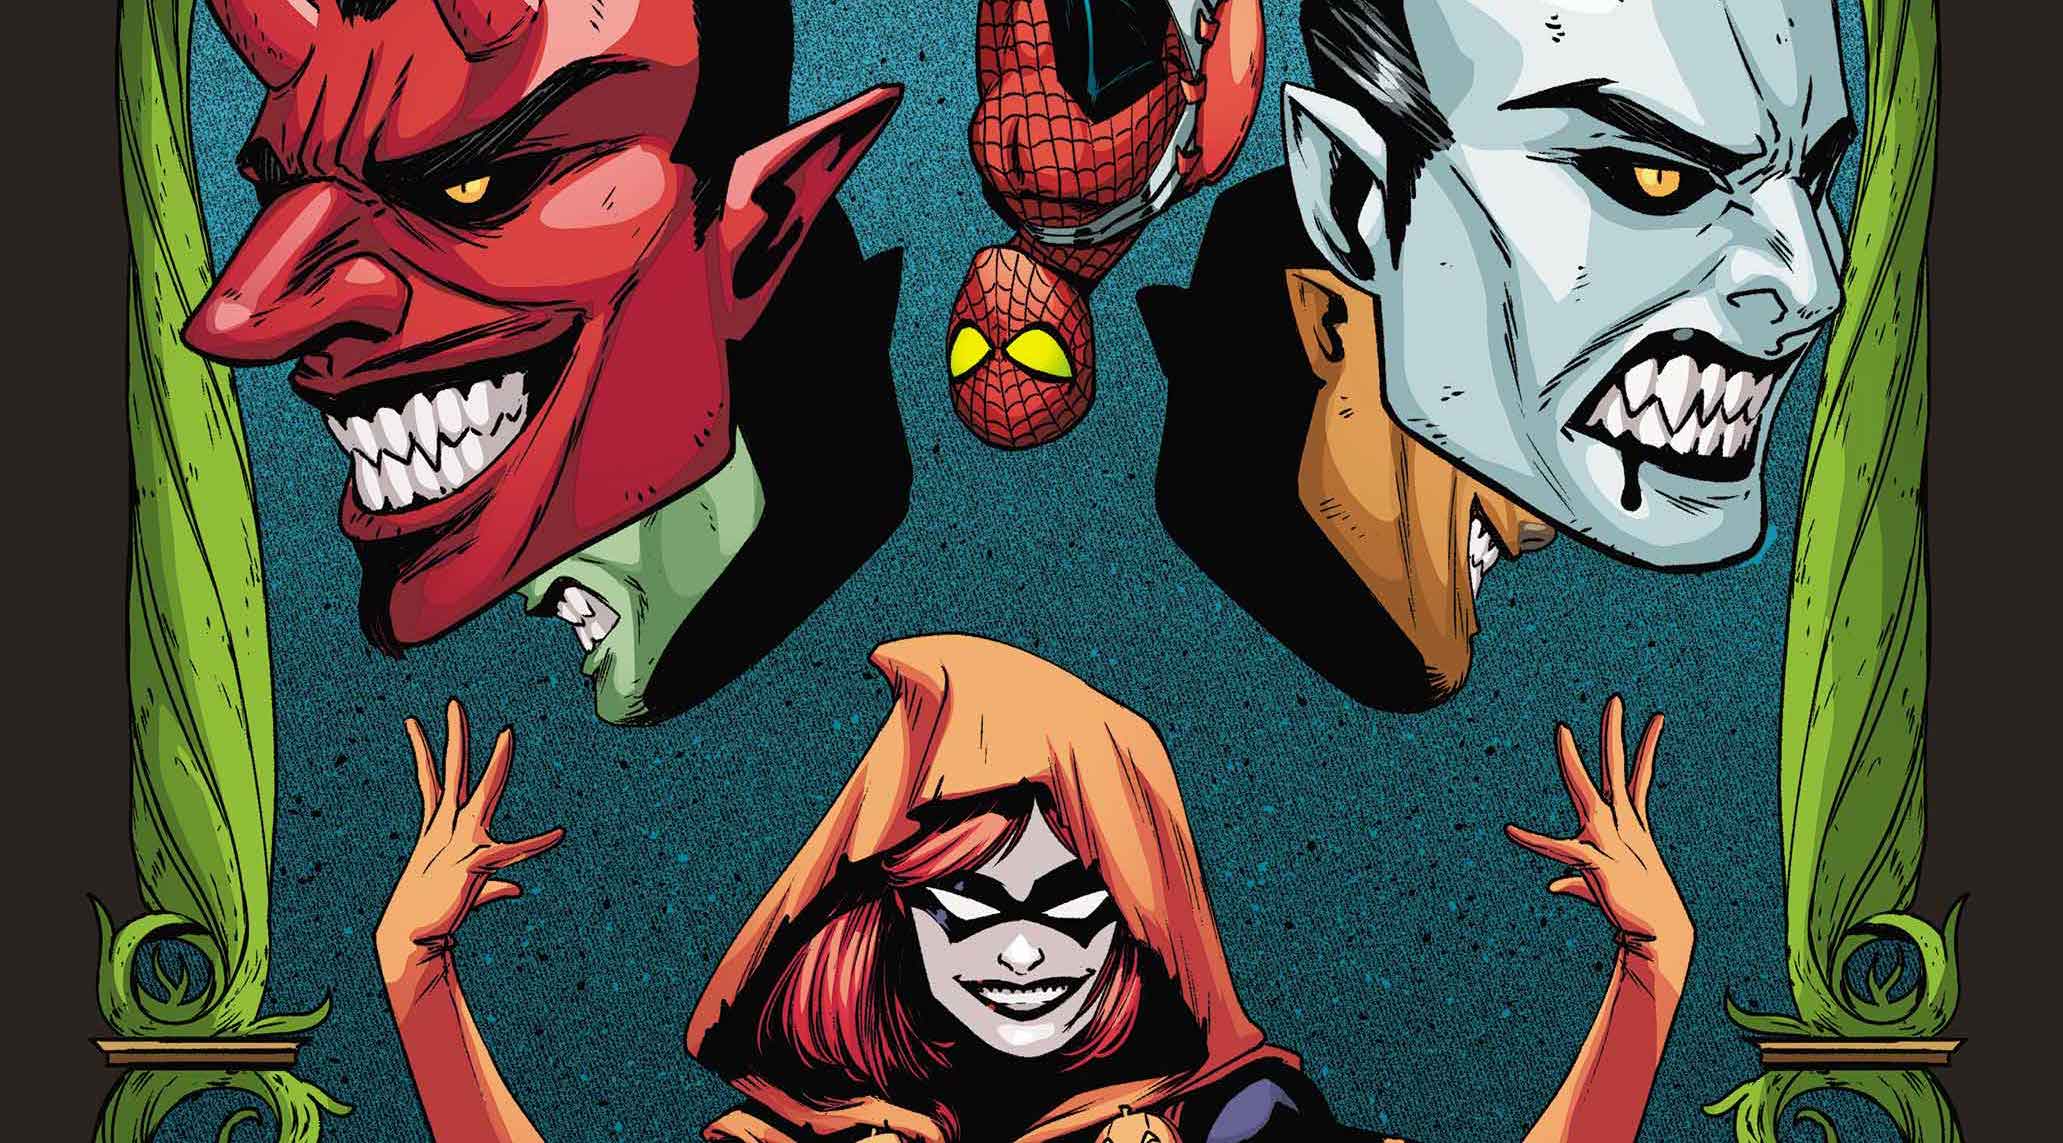 'Amazing Spider-Man Annual' #1 to feature Hallow's Eve